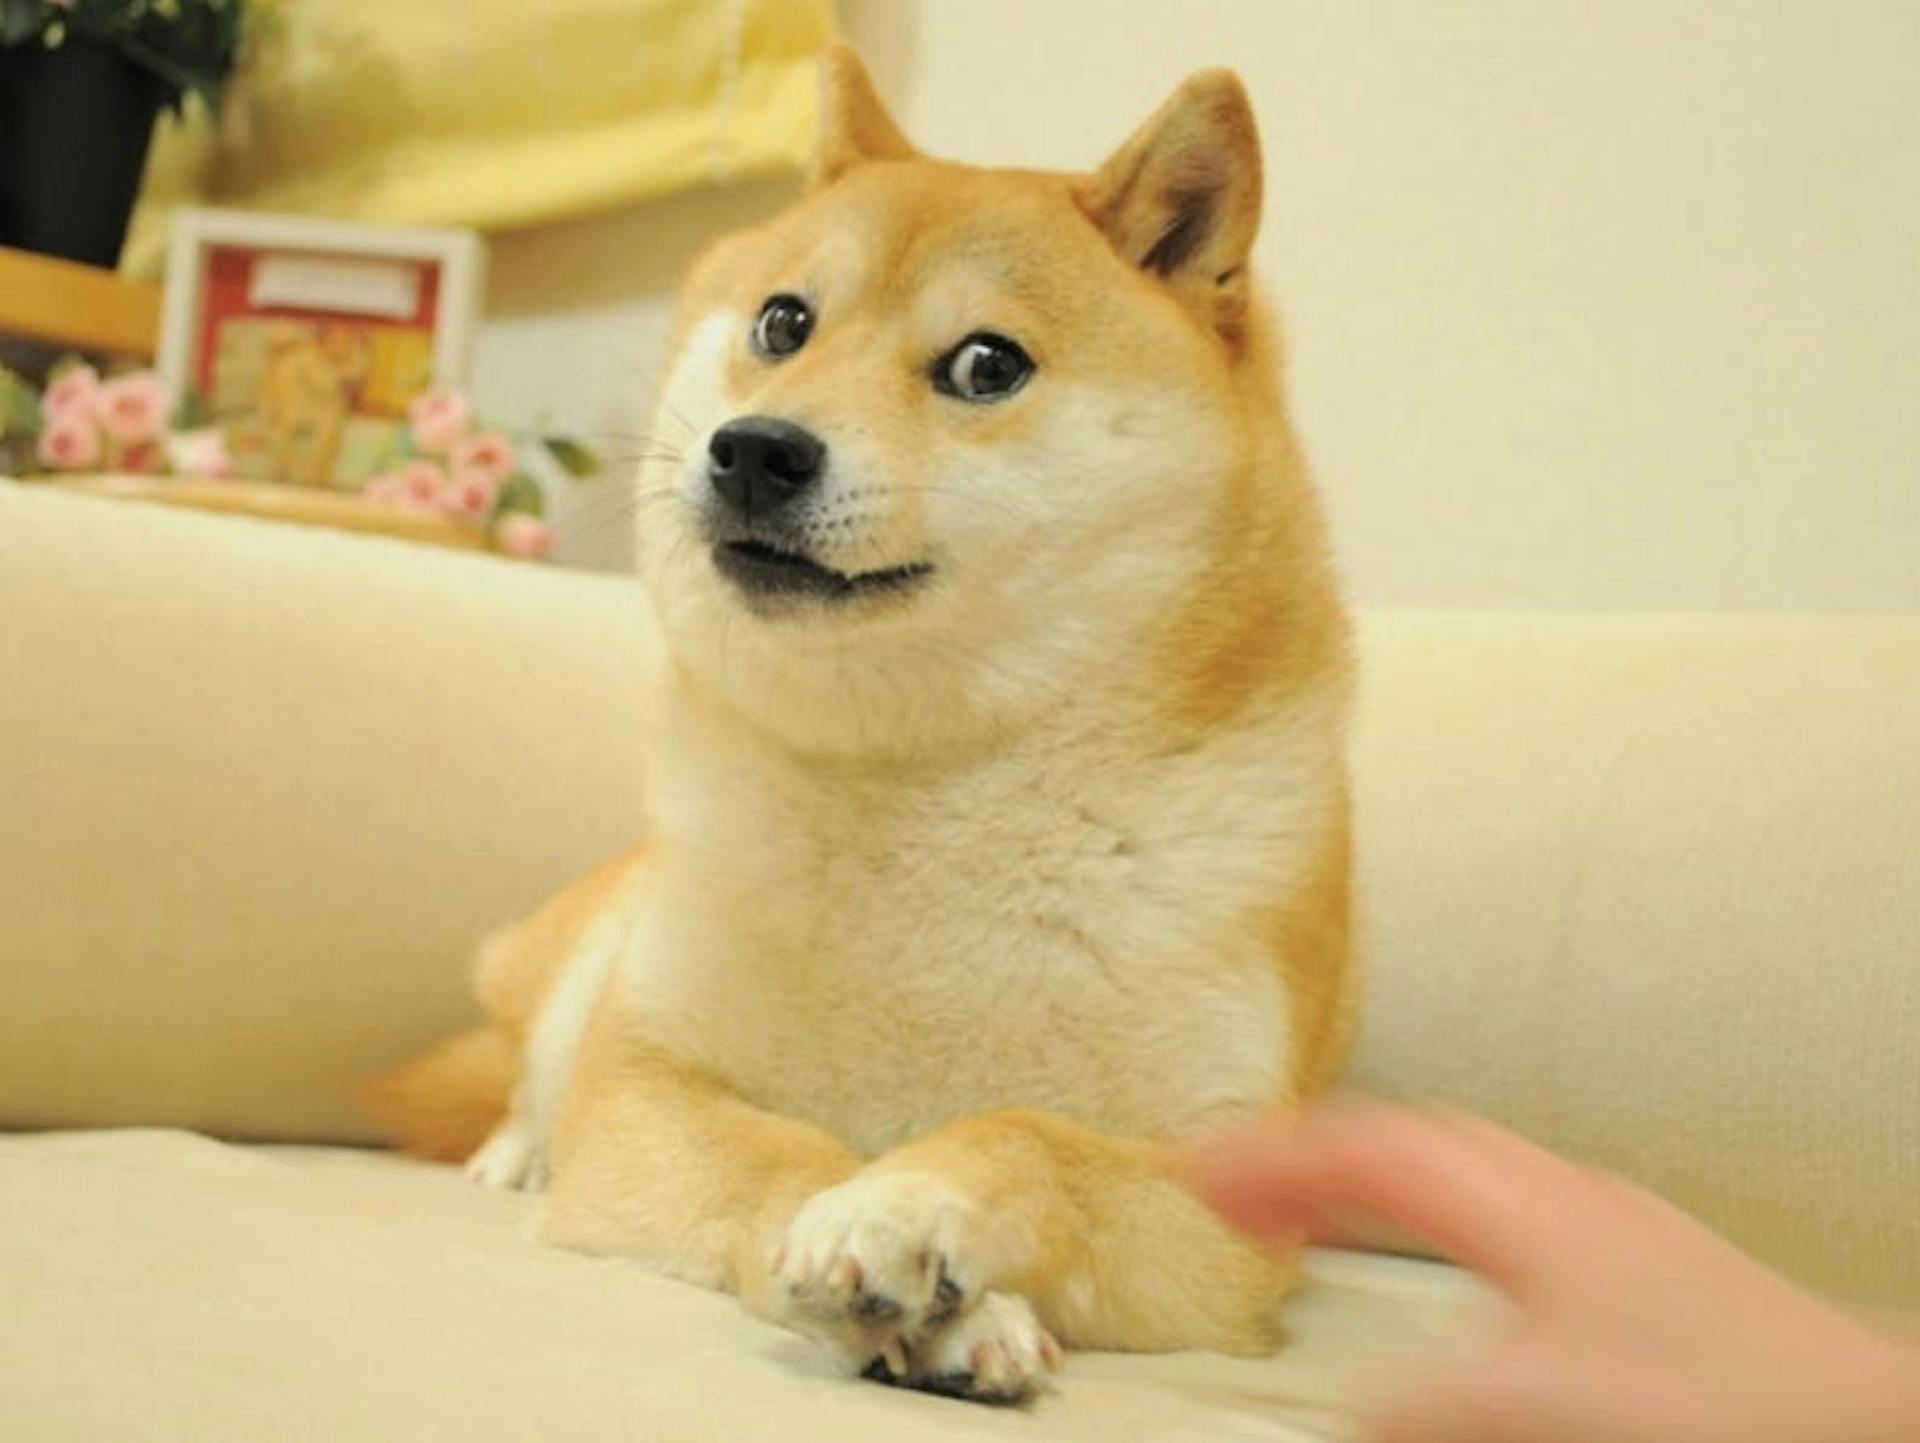 The Doge NFT is divided into 17 billion pieces called DOG tokens